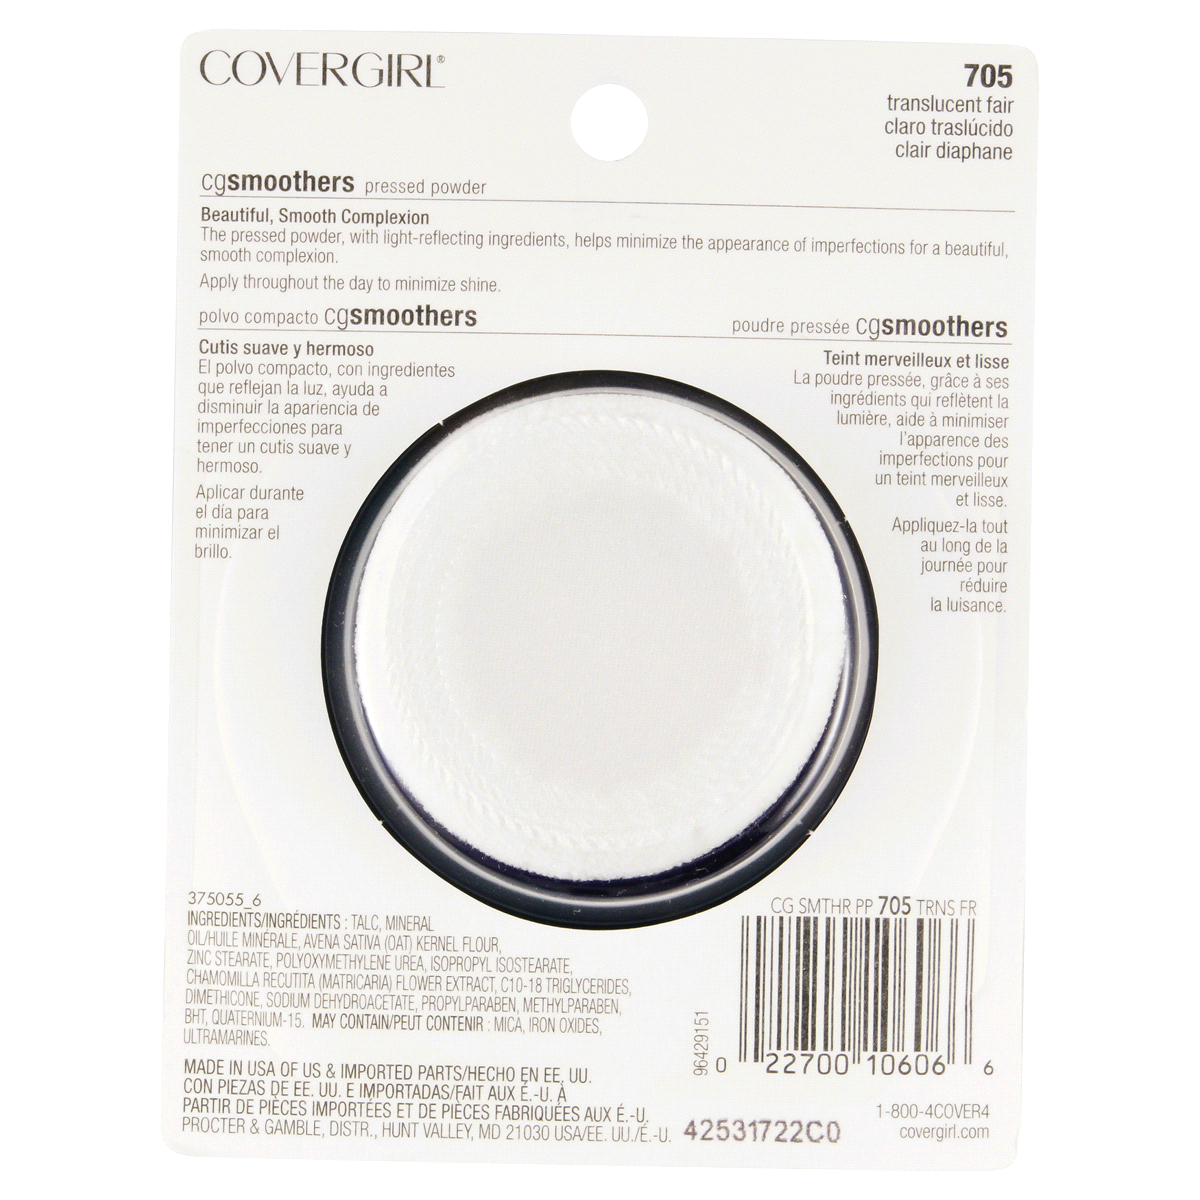 slide 2 of 2, Covergirl COVERGIRL Smoothers Pressed Powder Powder, Translucent Fair 705, 0.32 oz (9.3 g), 1 ct